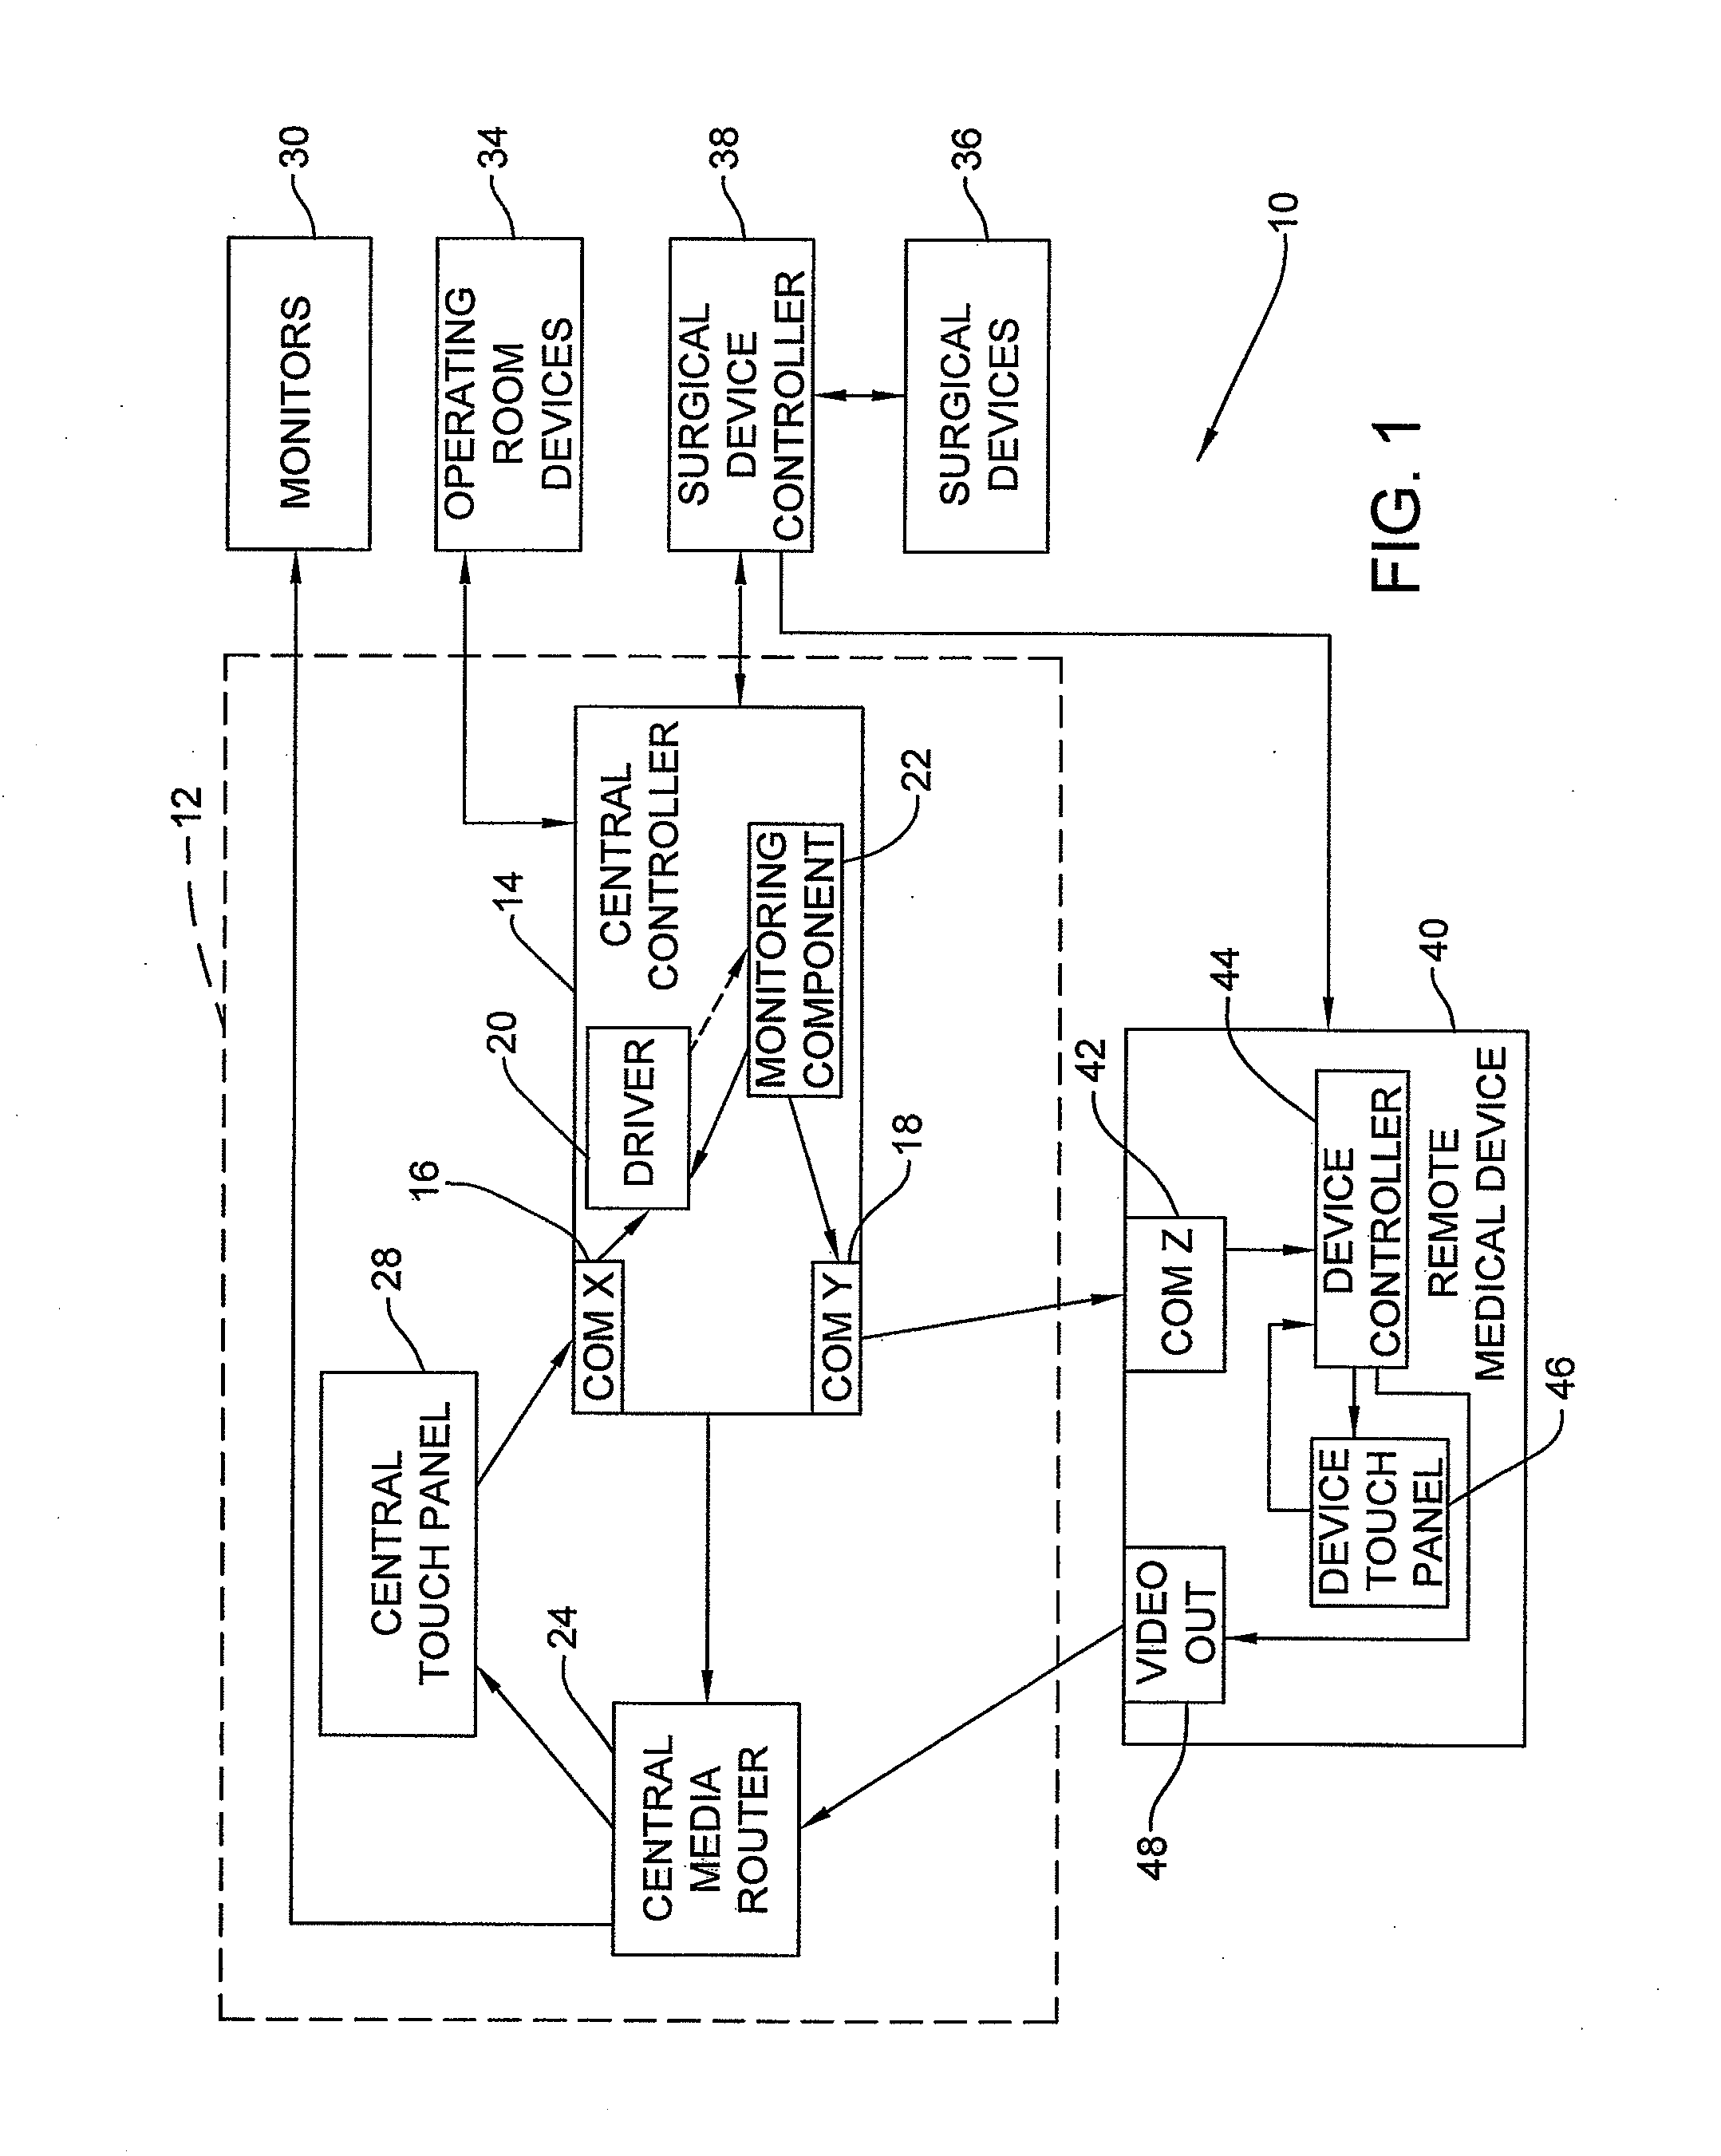 Method and apparatus for integrating multiple applications on a single touch panel